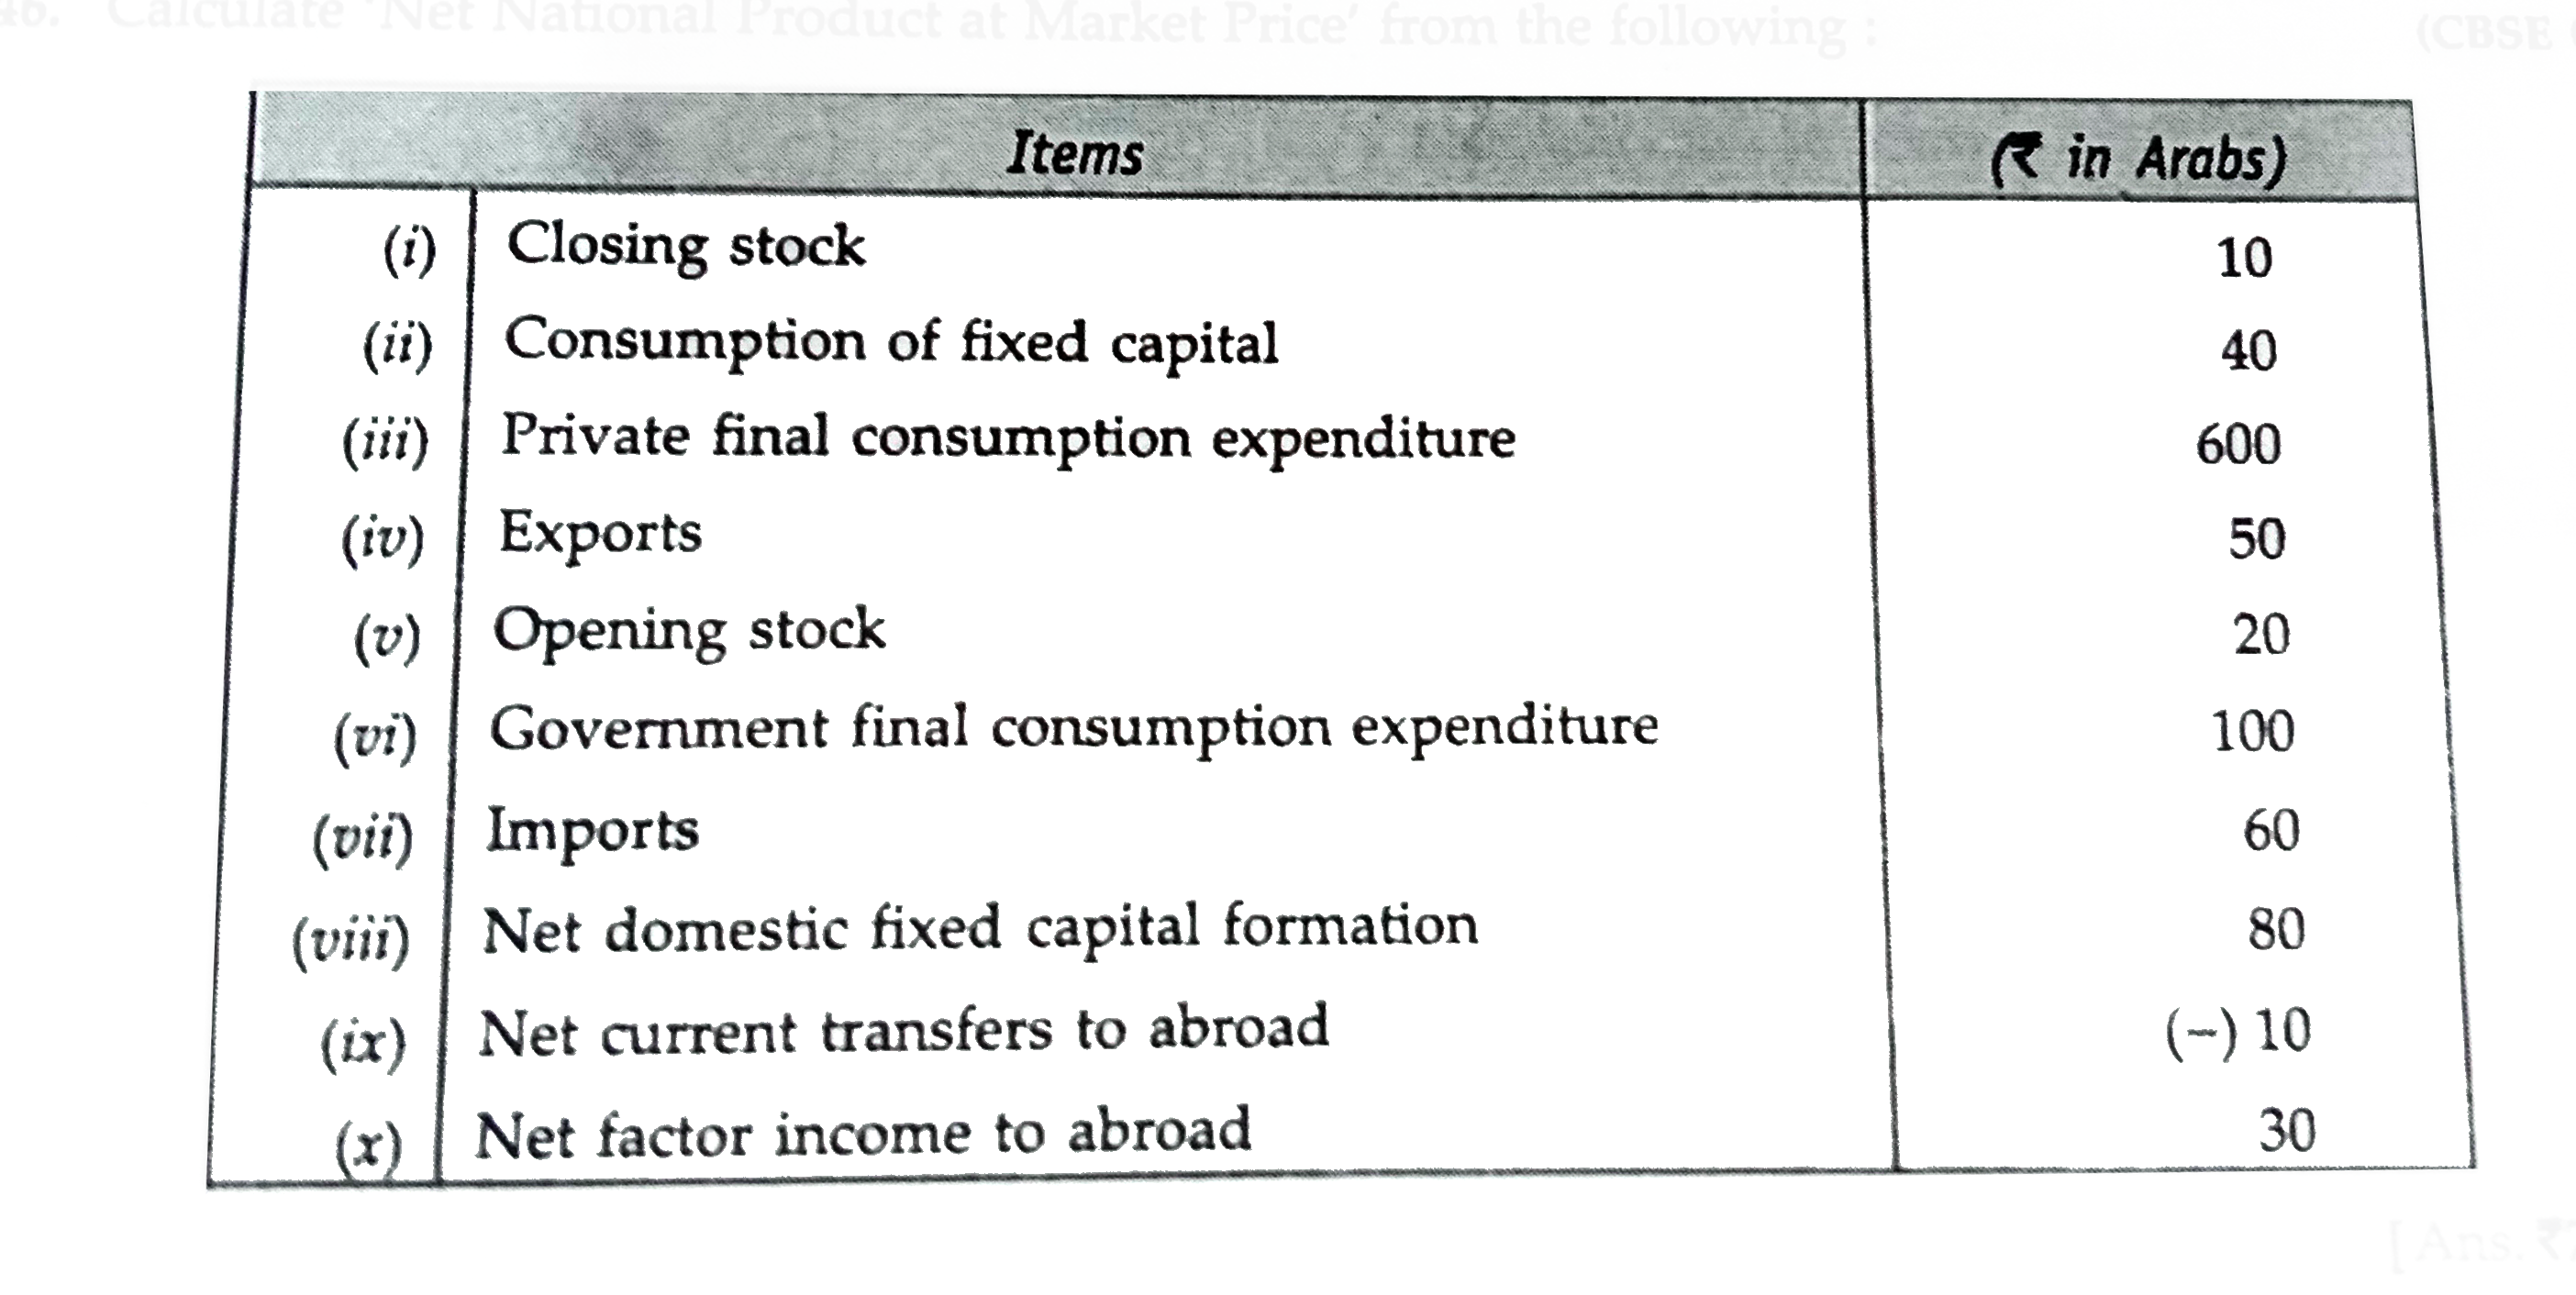 Calculate 'Net National Product at Market Price' from the following :